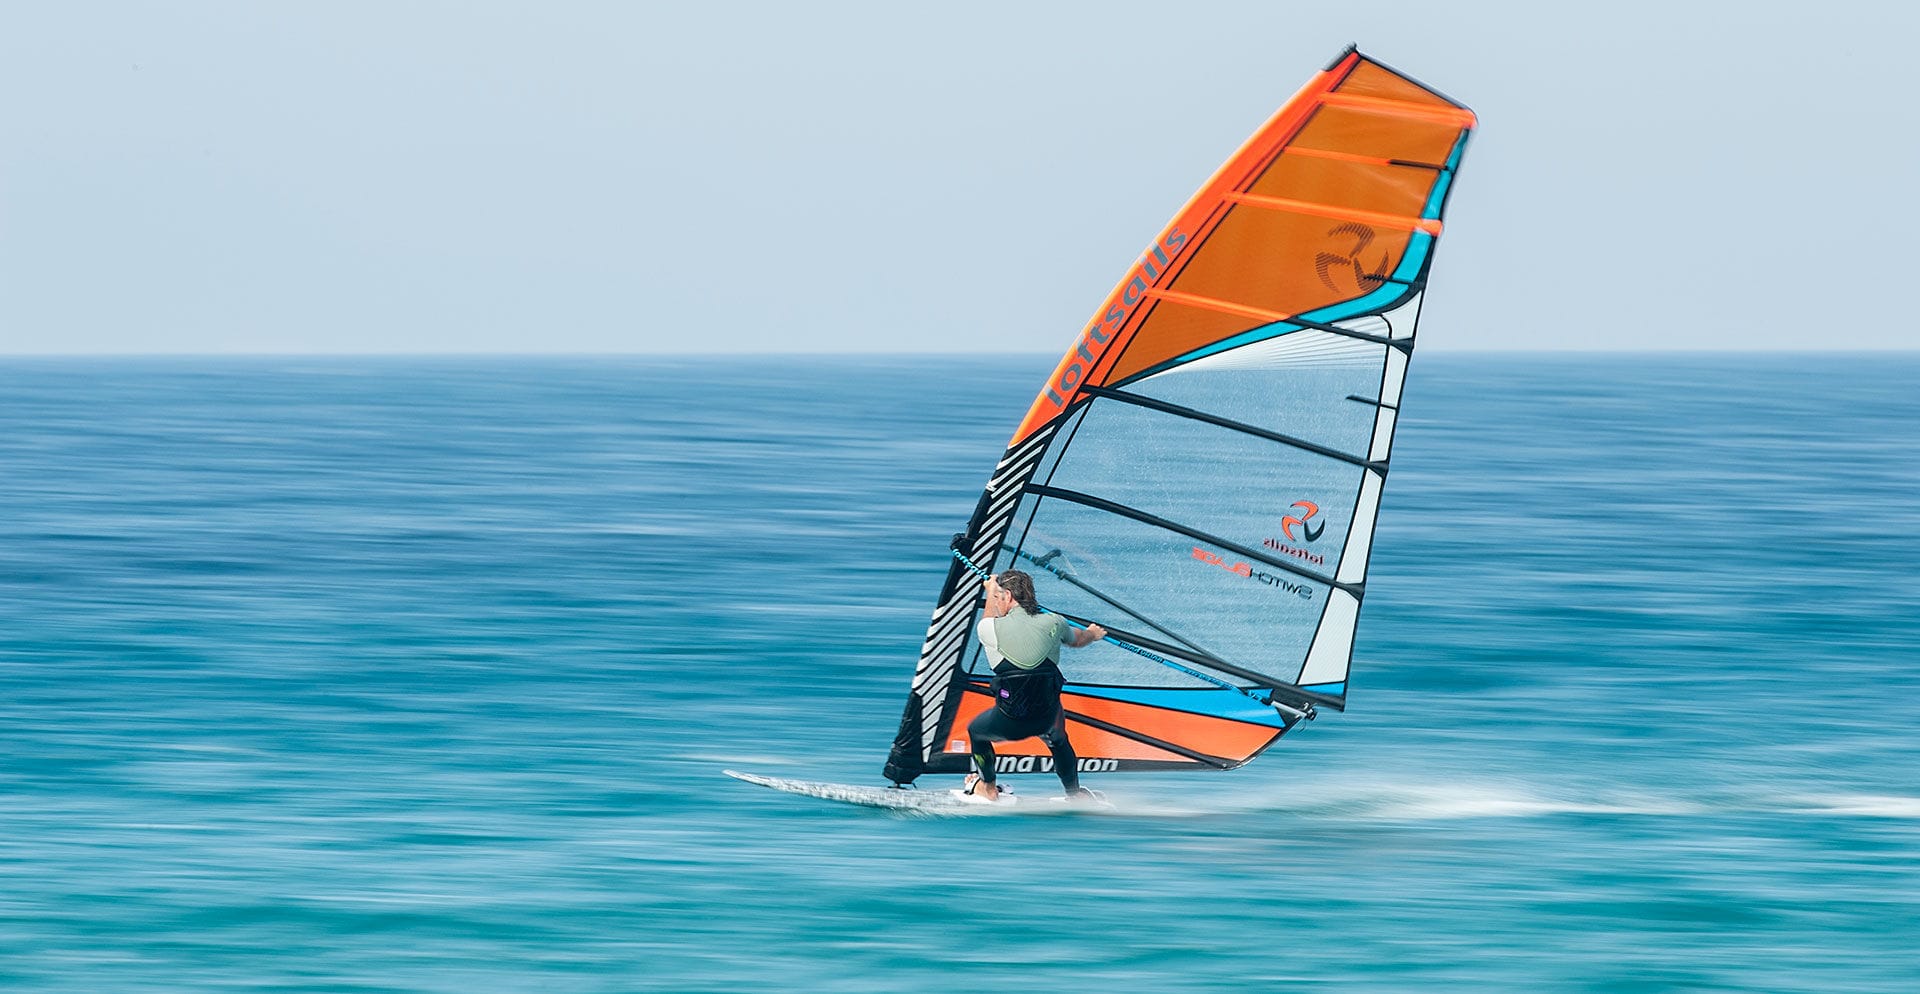 Global Entry-level Windsurf Sails Market 2020 Technology, Future Trends, Opportunities and COVID-19 Impact Analysis 2025 – Owned